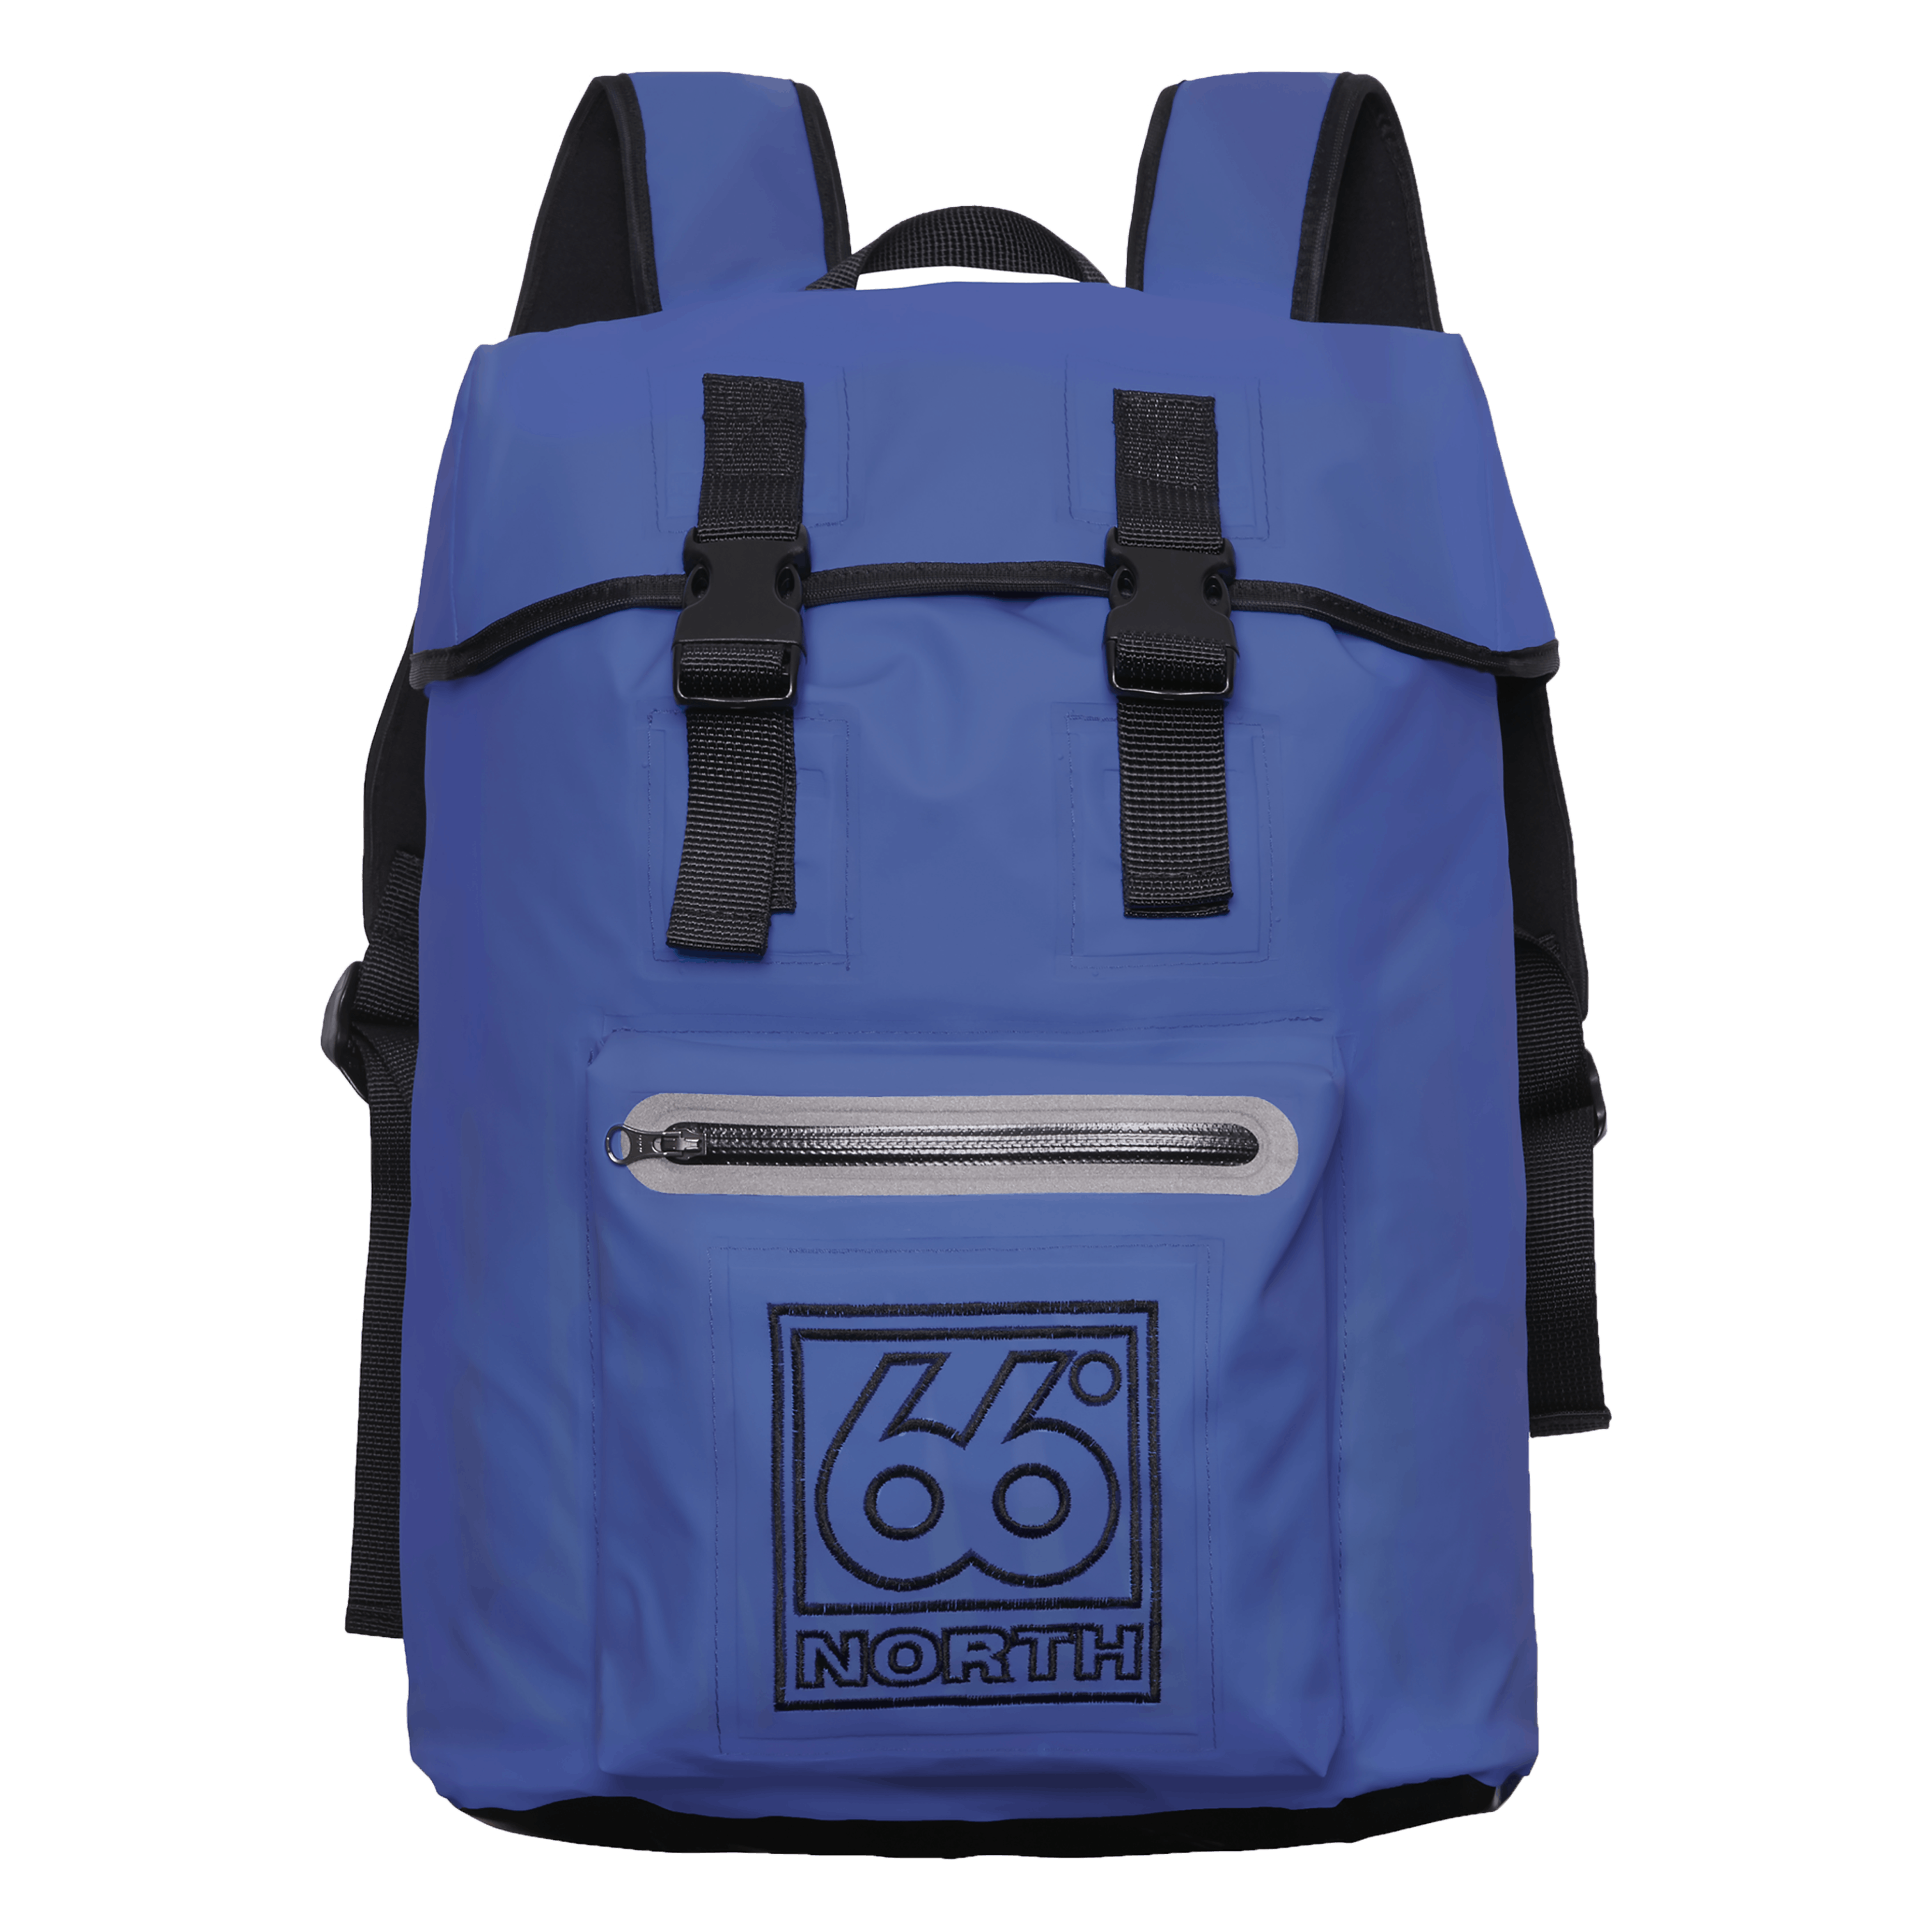 66 North Womens Backpack Accessories - Blue - One Size